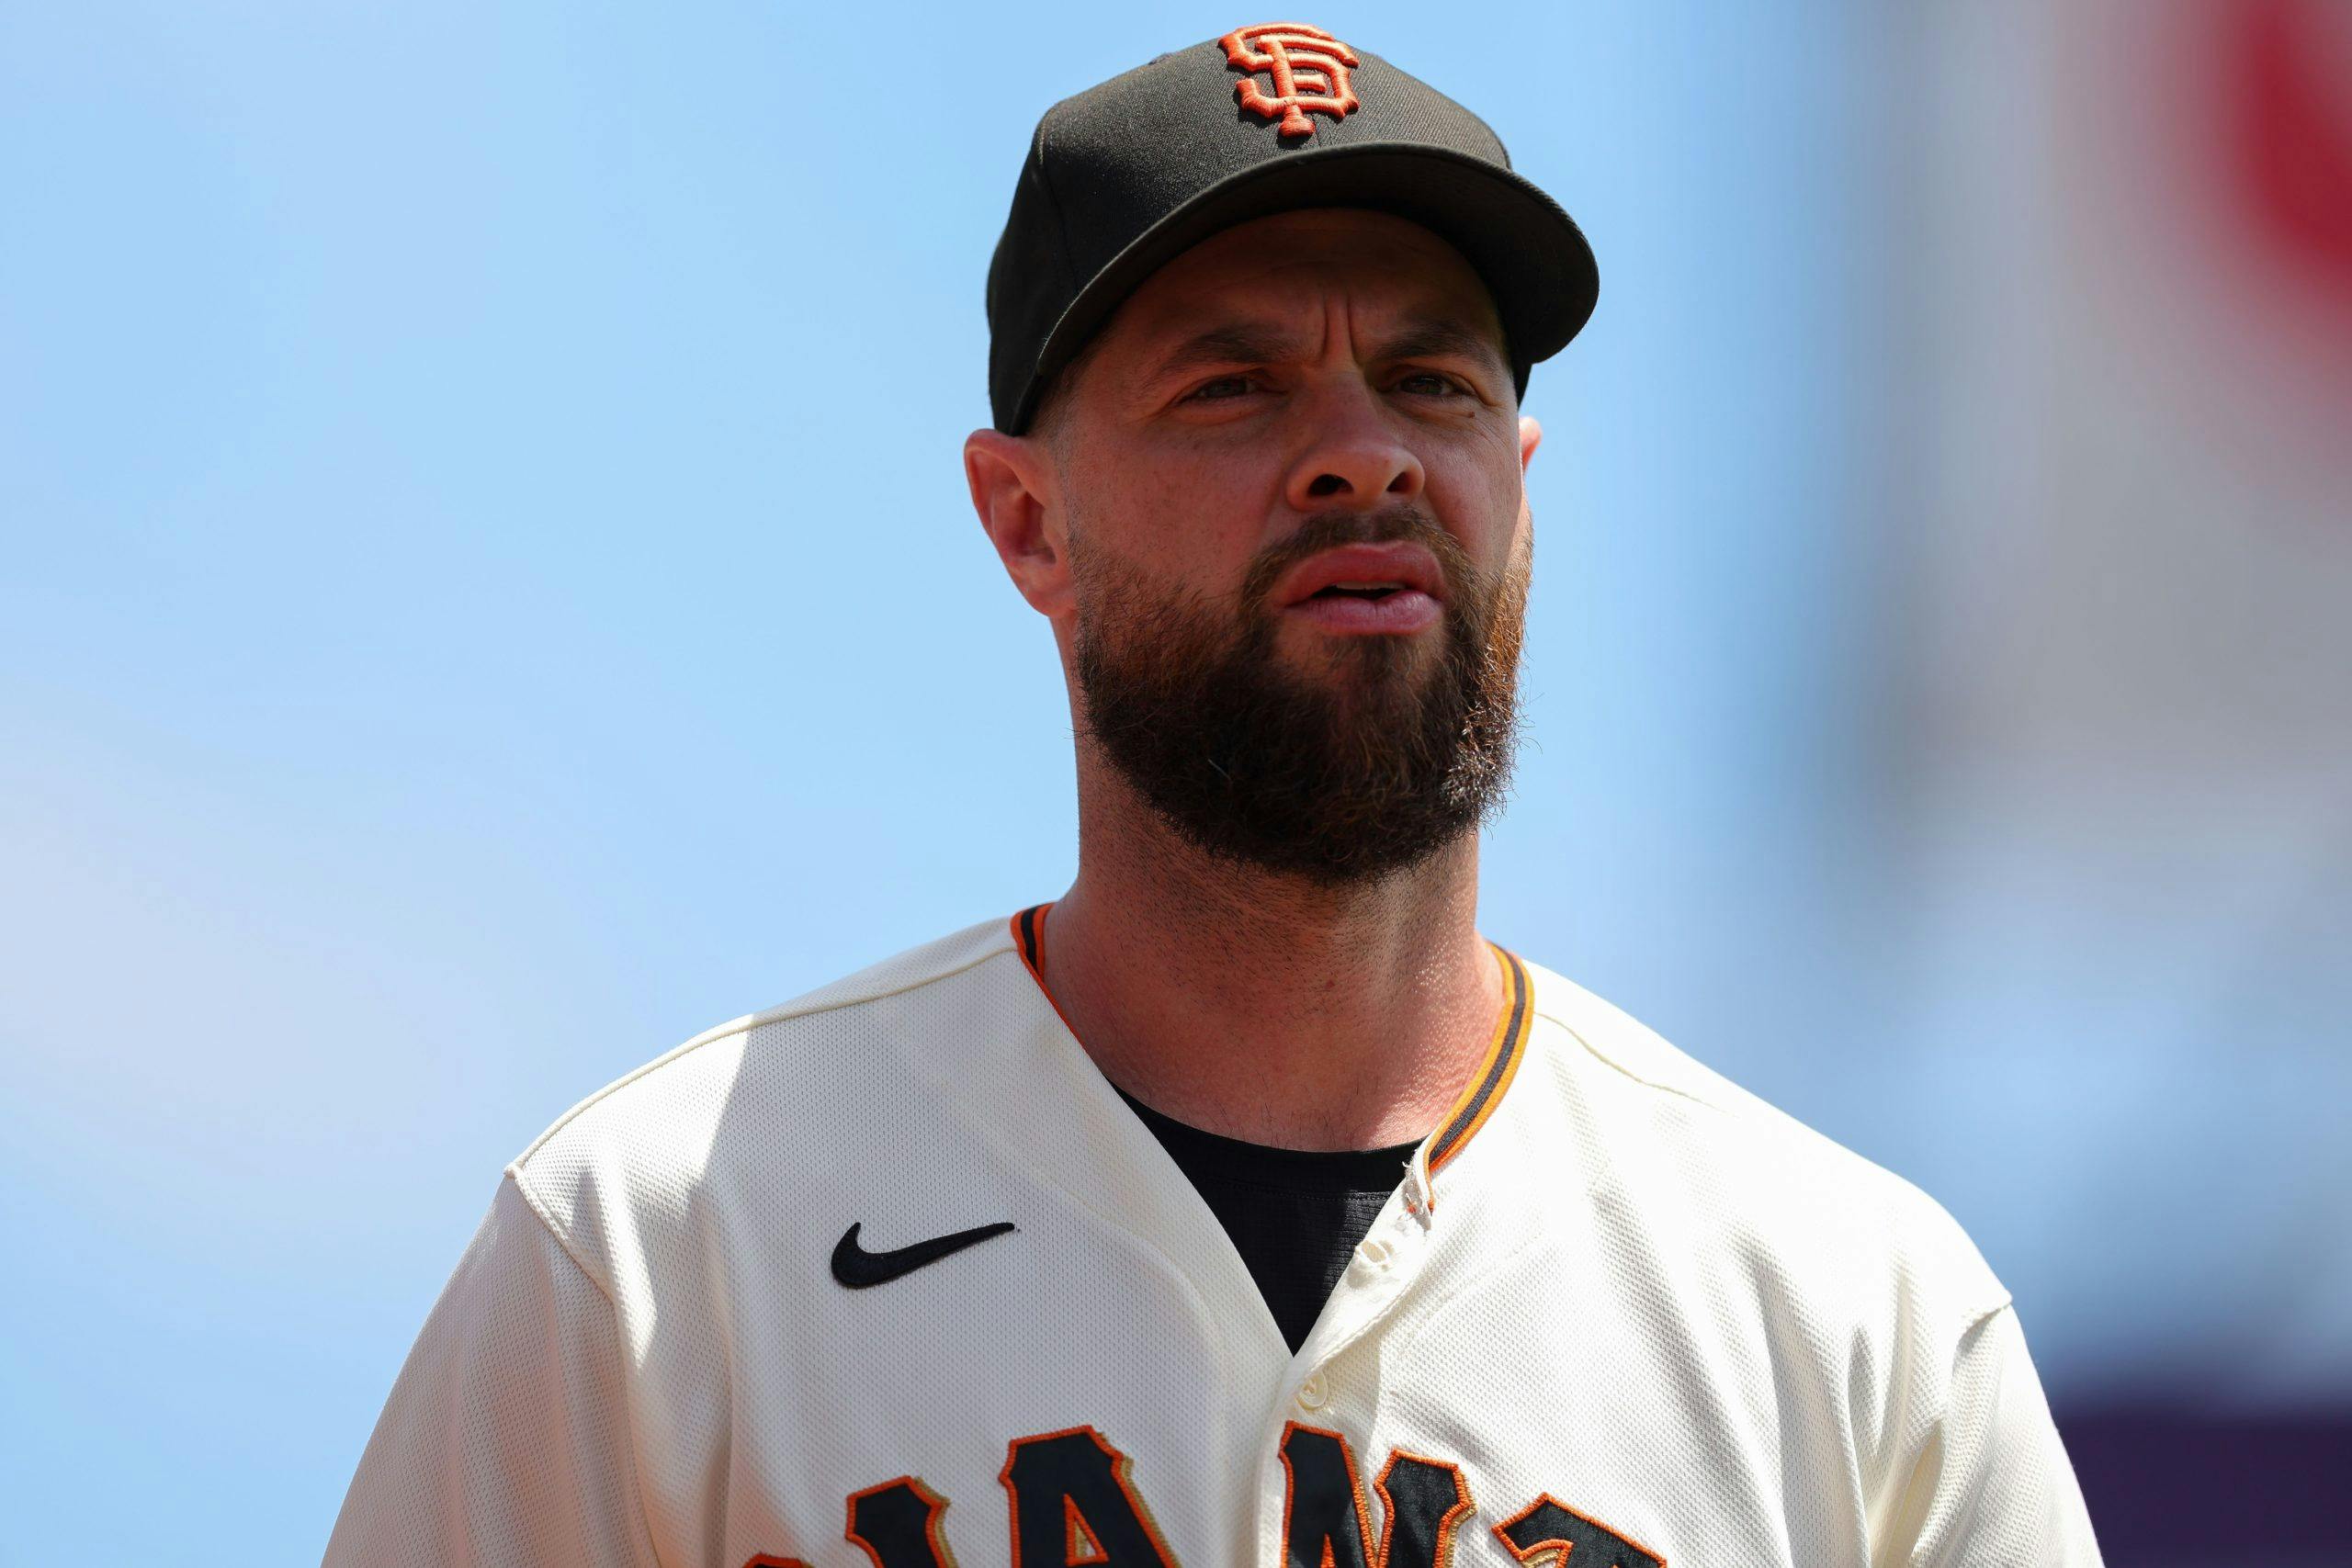 Thoughts on the Brandon Belt addition, who's next to come off the Blue Jays'  40-man roster, and more! - BlueJaysNation